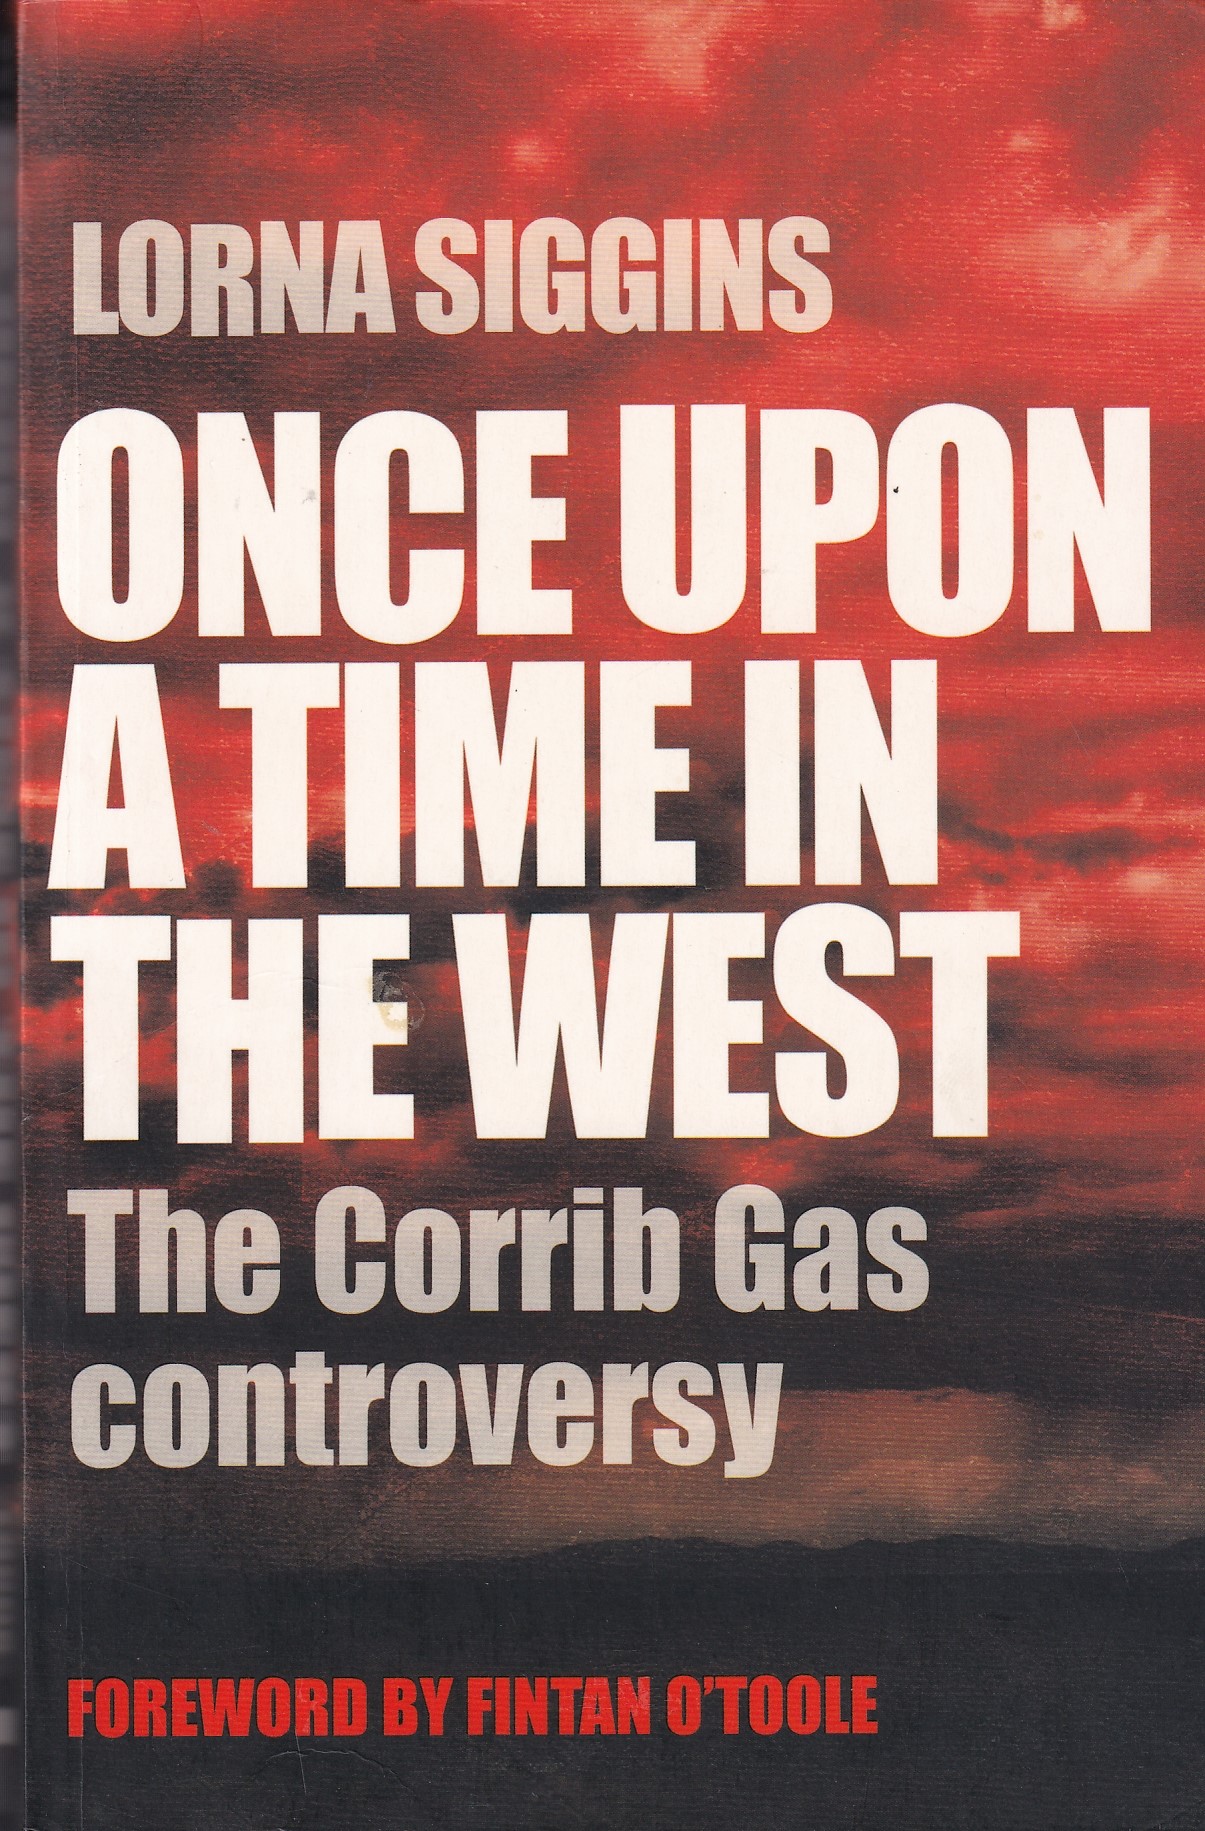 Once Upon a Time in the West: The Corrib Gas Controversy | Siggins, Lorna | Charlie Byrne's